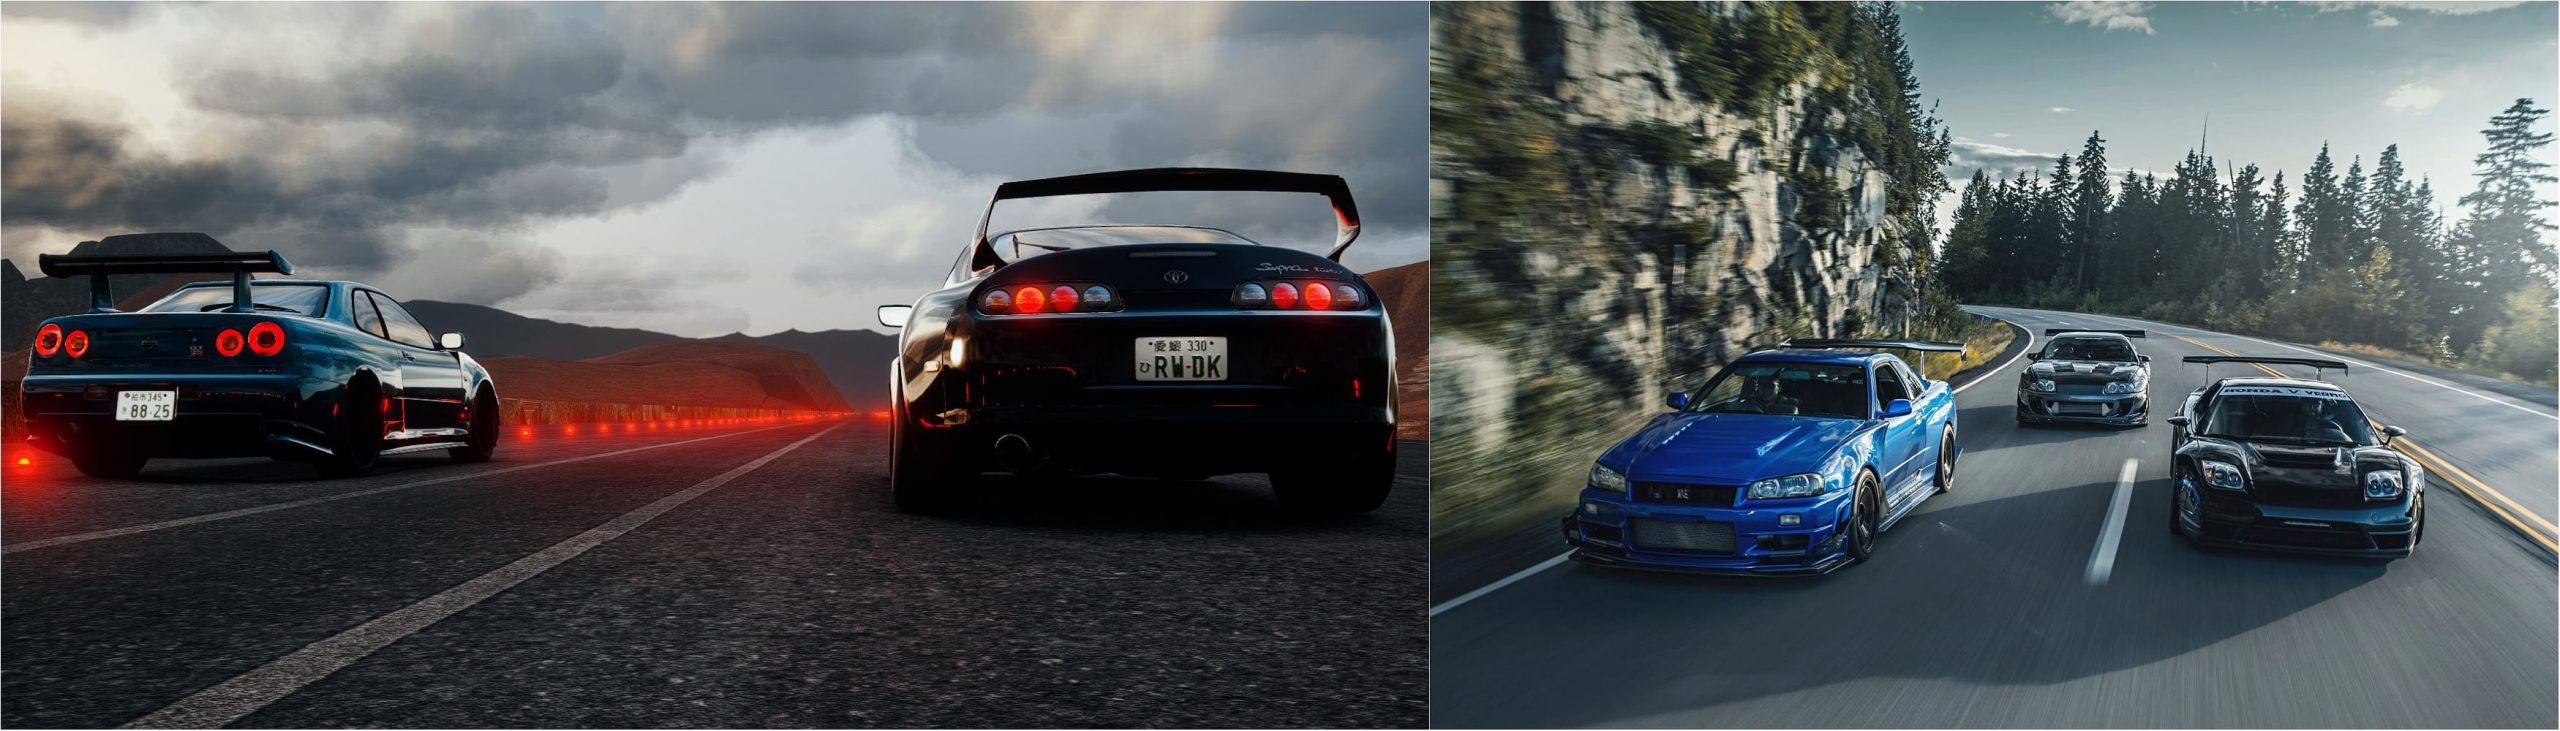 Legacy of the Toyota Supra in 'The Fast and the Furious'